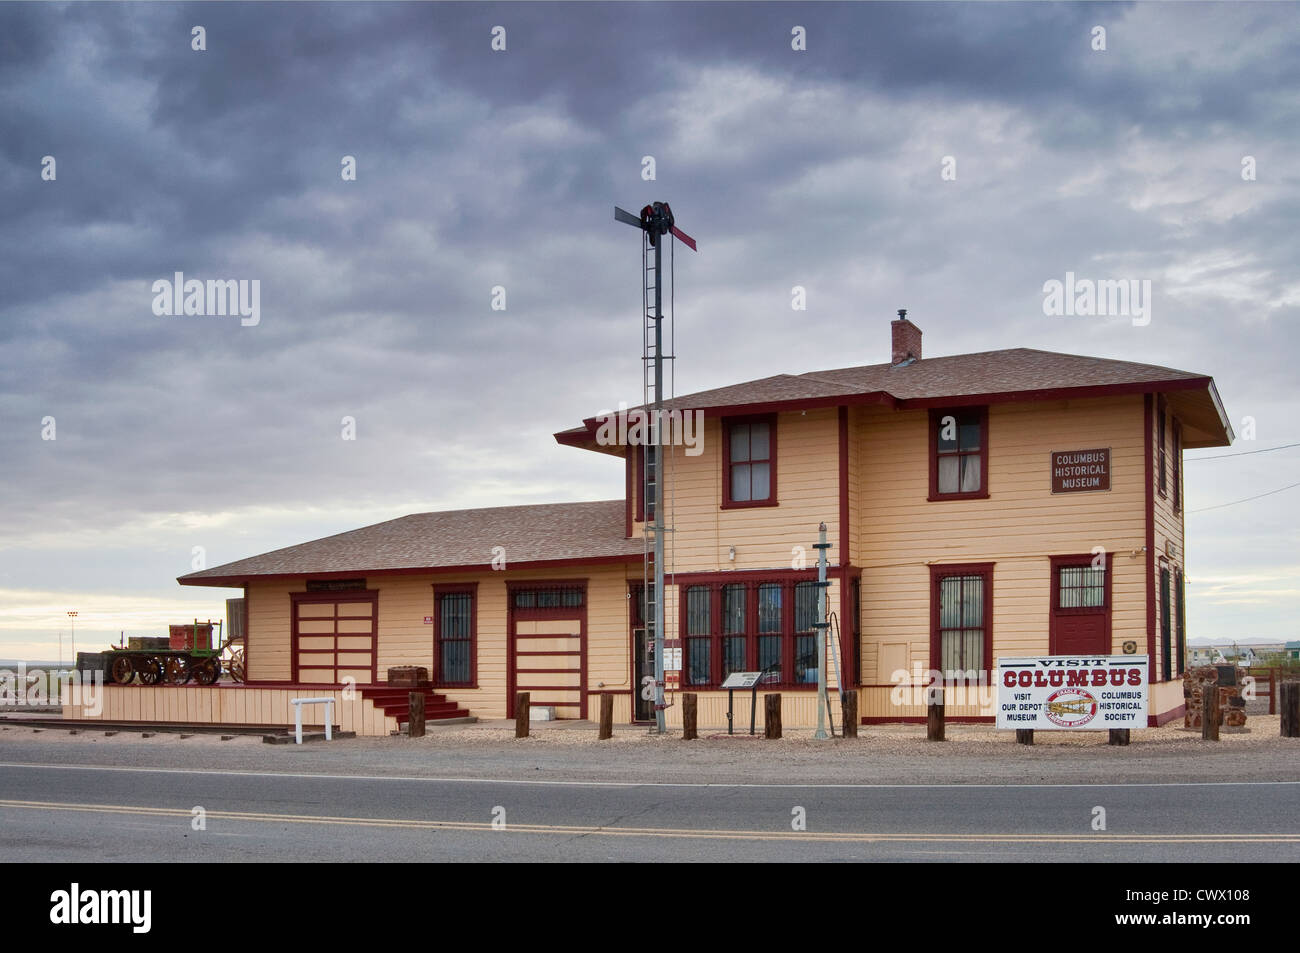 1902 Southern Pacific Railroad Depot, jetzt Columbus Historical Society Museum in Columbus, New Mexico, USA Stockfoto